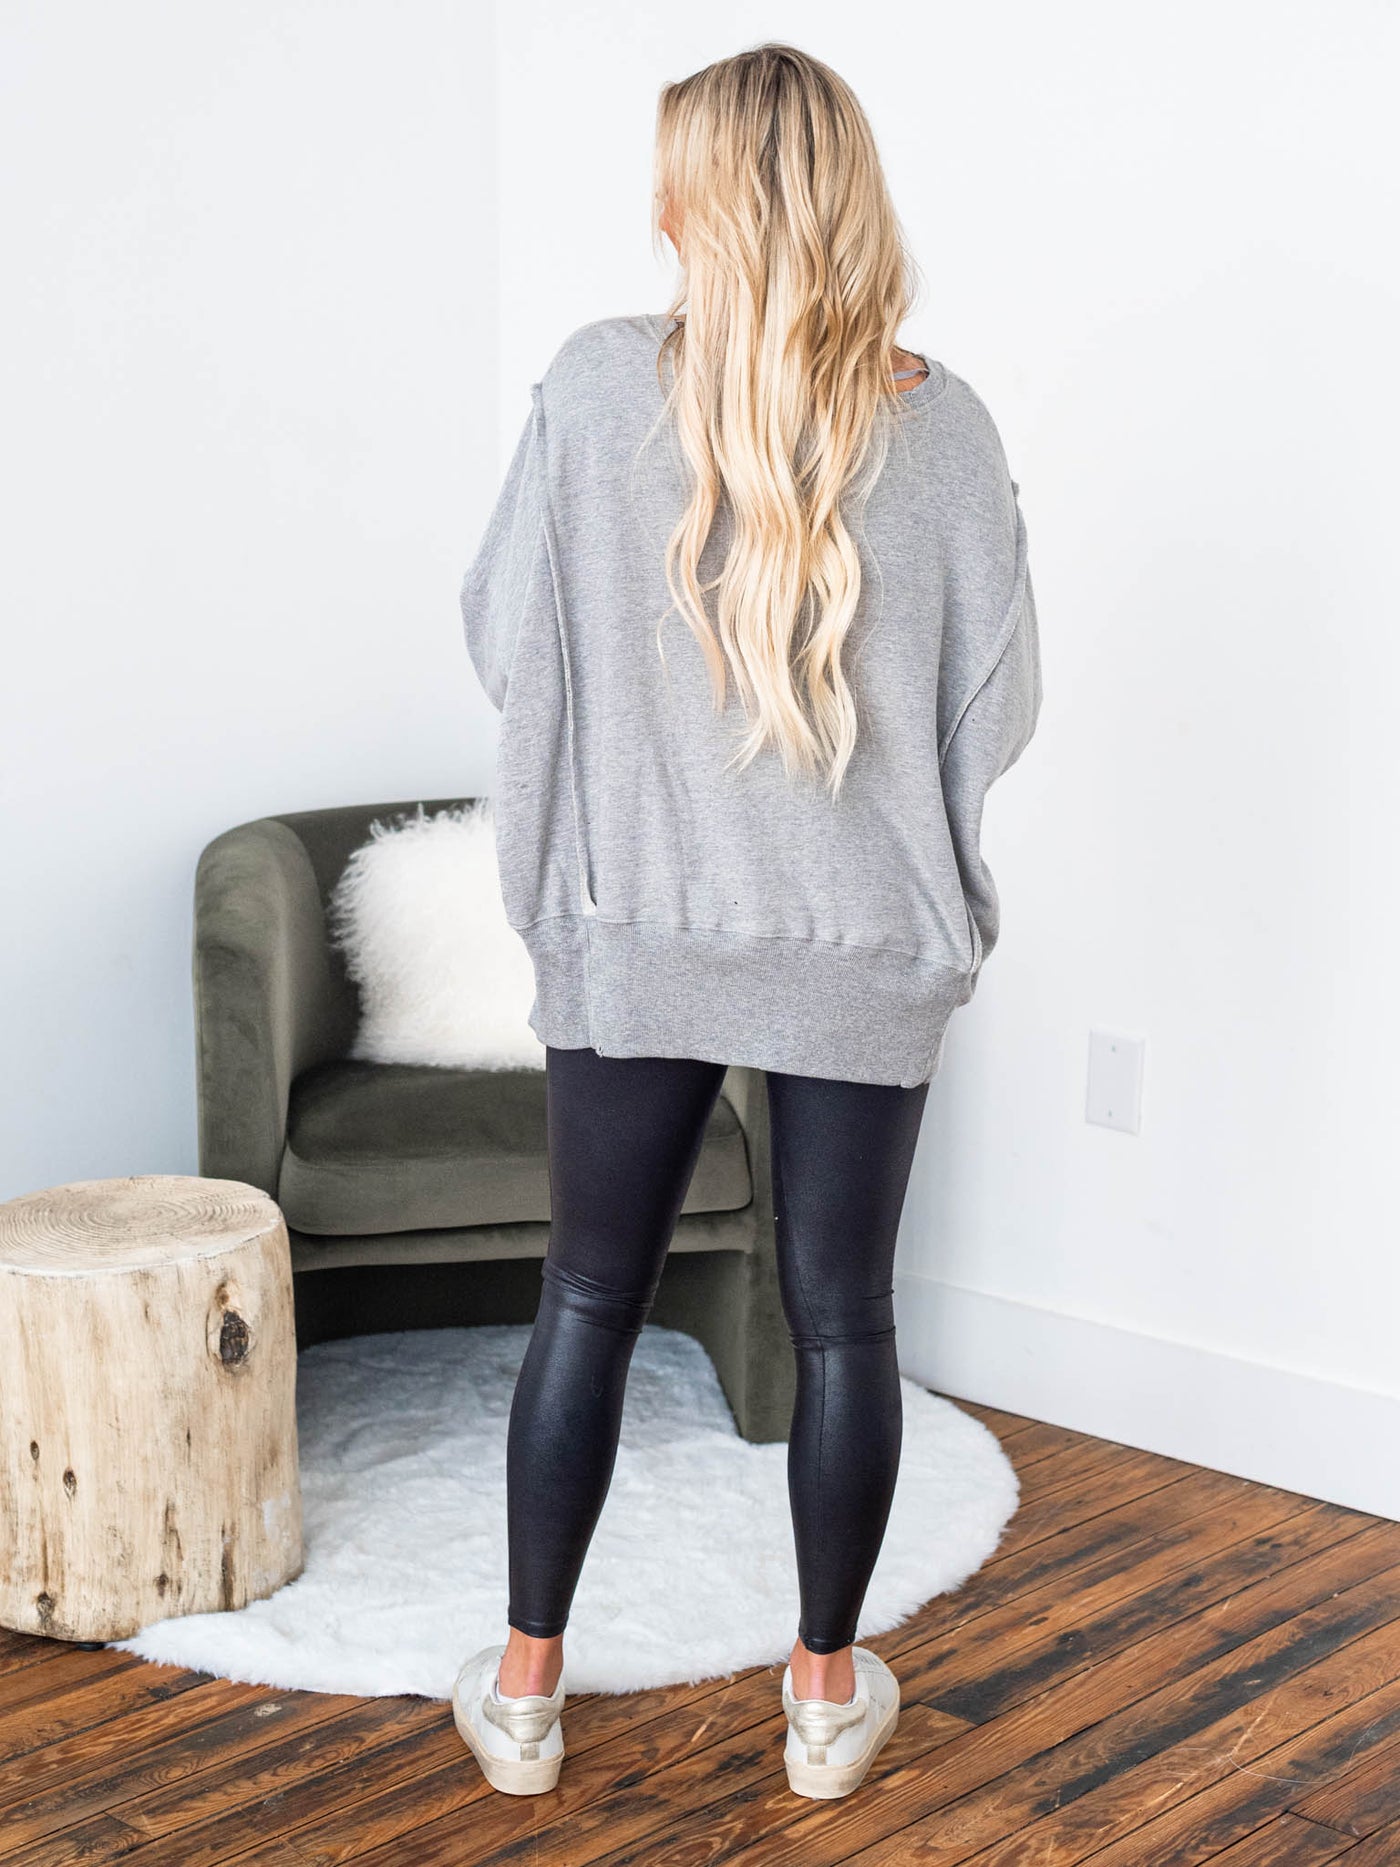 Free People Sweater + Spanx Leggings. | Ash from LSR